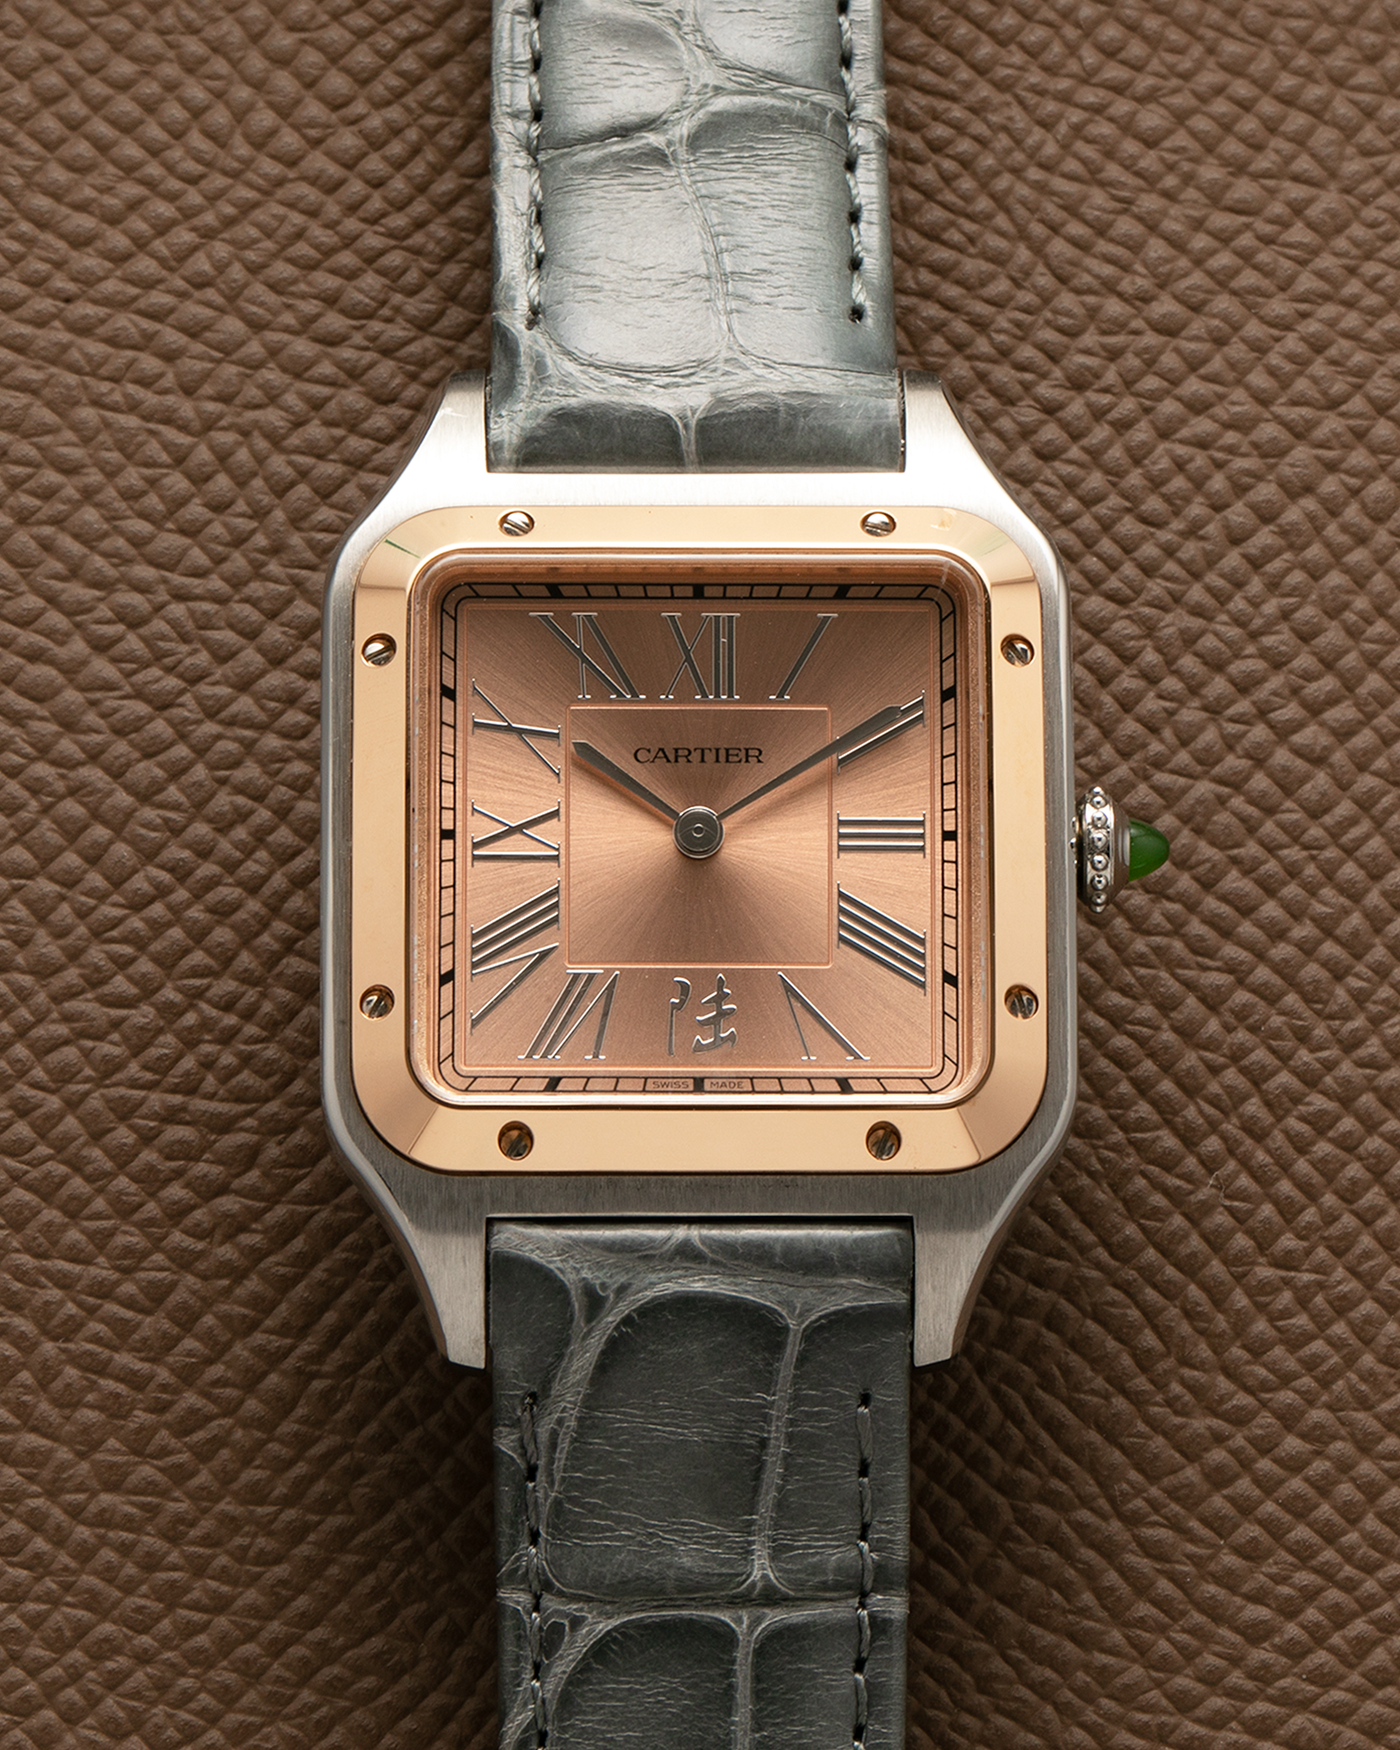 Brand: Cartier Year: 2022 Model: Santos-Dumont ‘China’, Limited Edition of 300 pieces Reference Number: W2SA0027 Material: Stainless Steel Case and 18-carat Rose Gold Bezel Movement: Cartier Cal. 430 MC, Manual-Winding Case Dimensions: 43.5mm x 31.4mm Lud Width: 18mm Strap: Cartier Anthracite Grey Alligator Leather Strap with Signed Stainless Steel Tang Buckle